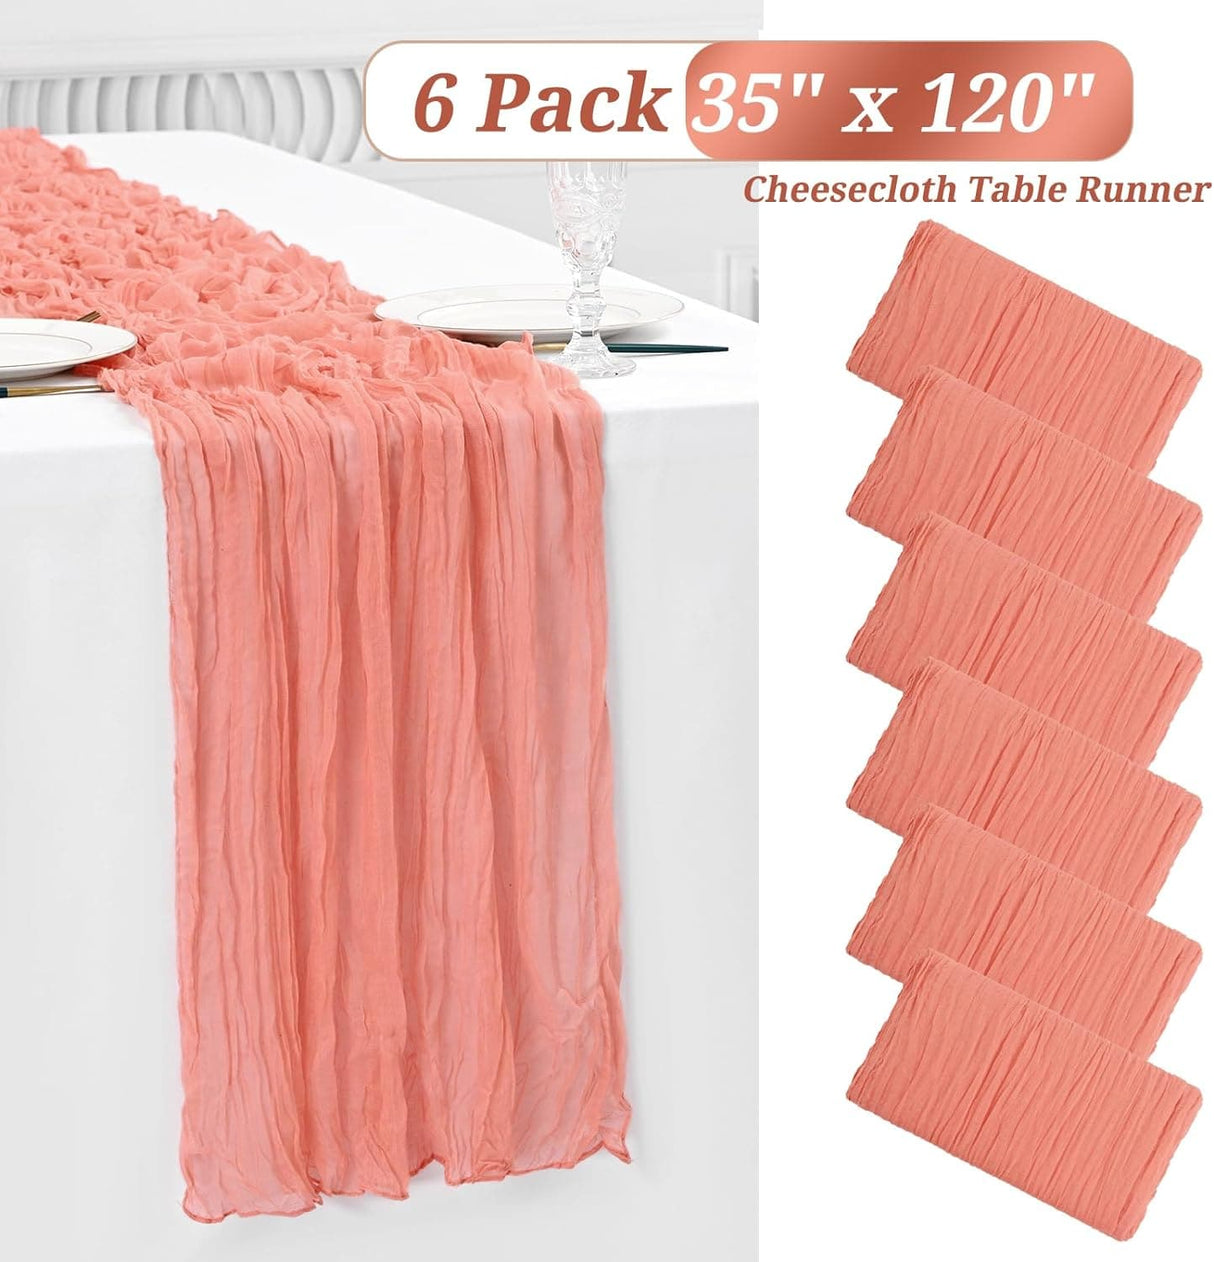 6 Pack Cheesecloth Table Runner Gauze Table Runner 10FT/13FT Long Semi-Sheer Table Runner Boho or Rustic Wedding Table Decor for Wedding Decor Arch Draping Bridal Shower Holiday Party